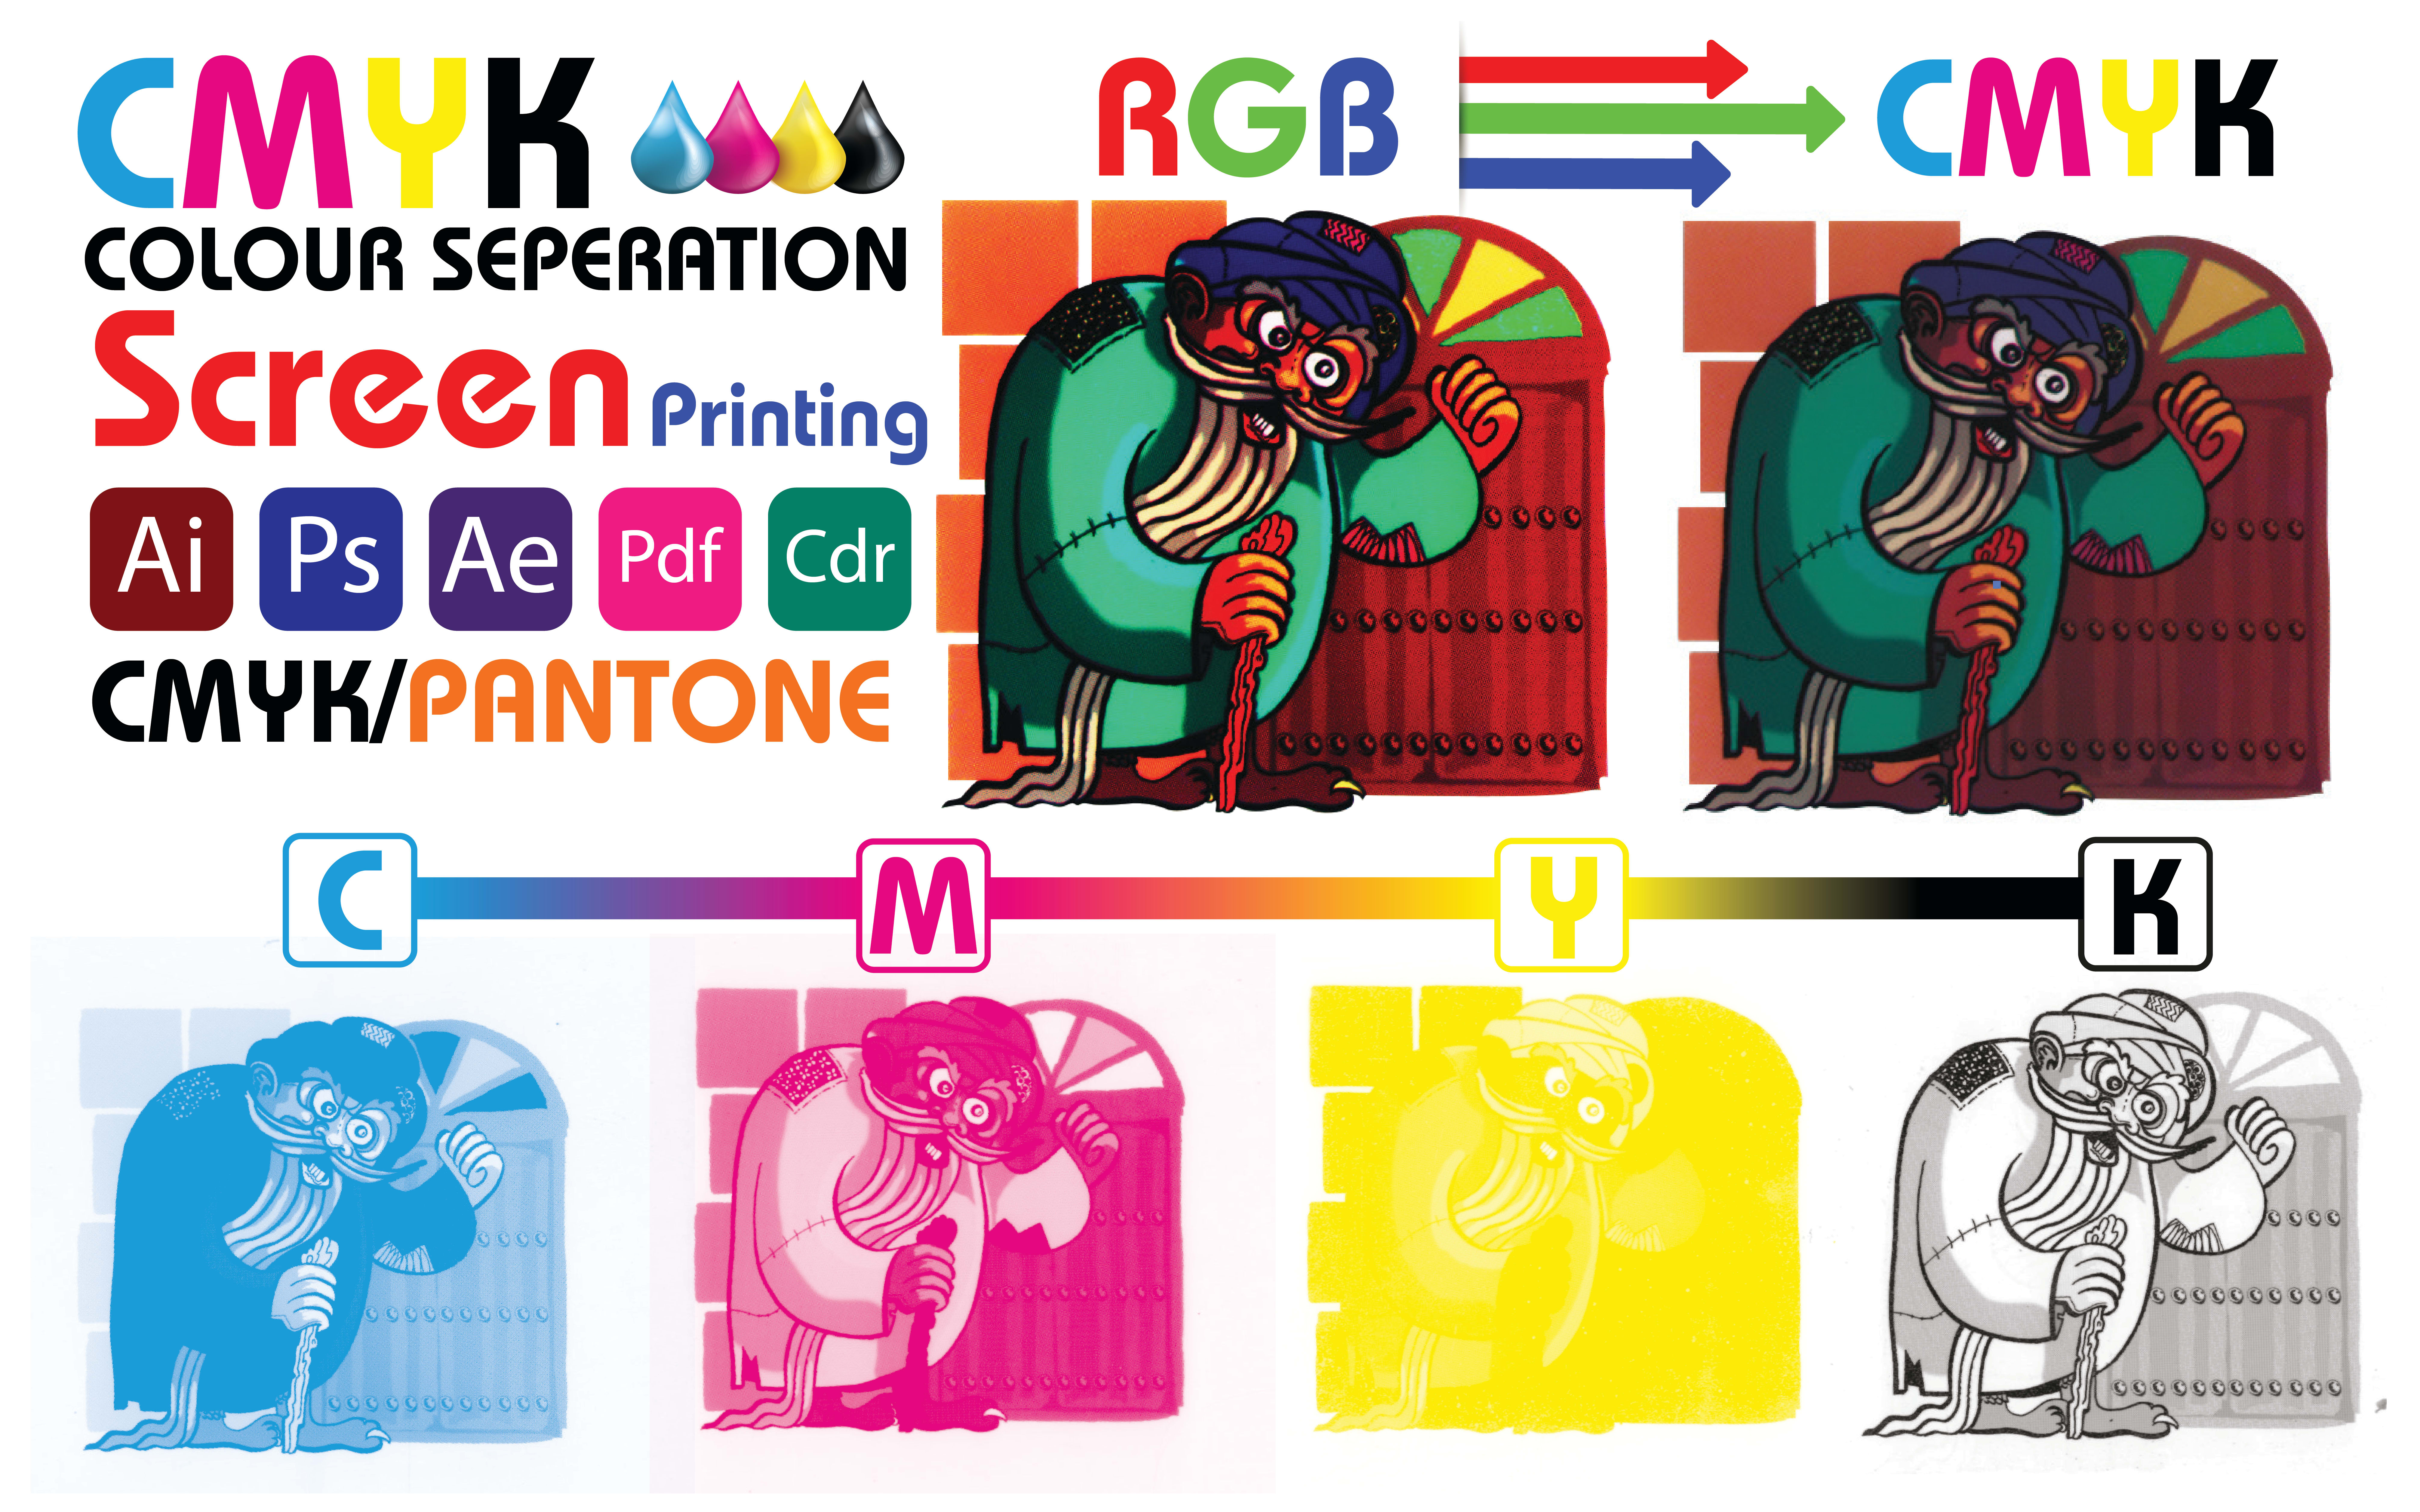 RGB, CMYK & Spot Colors: What You Need to Know